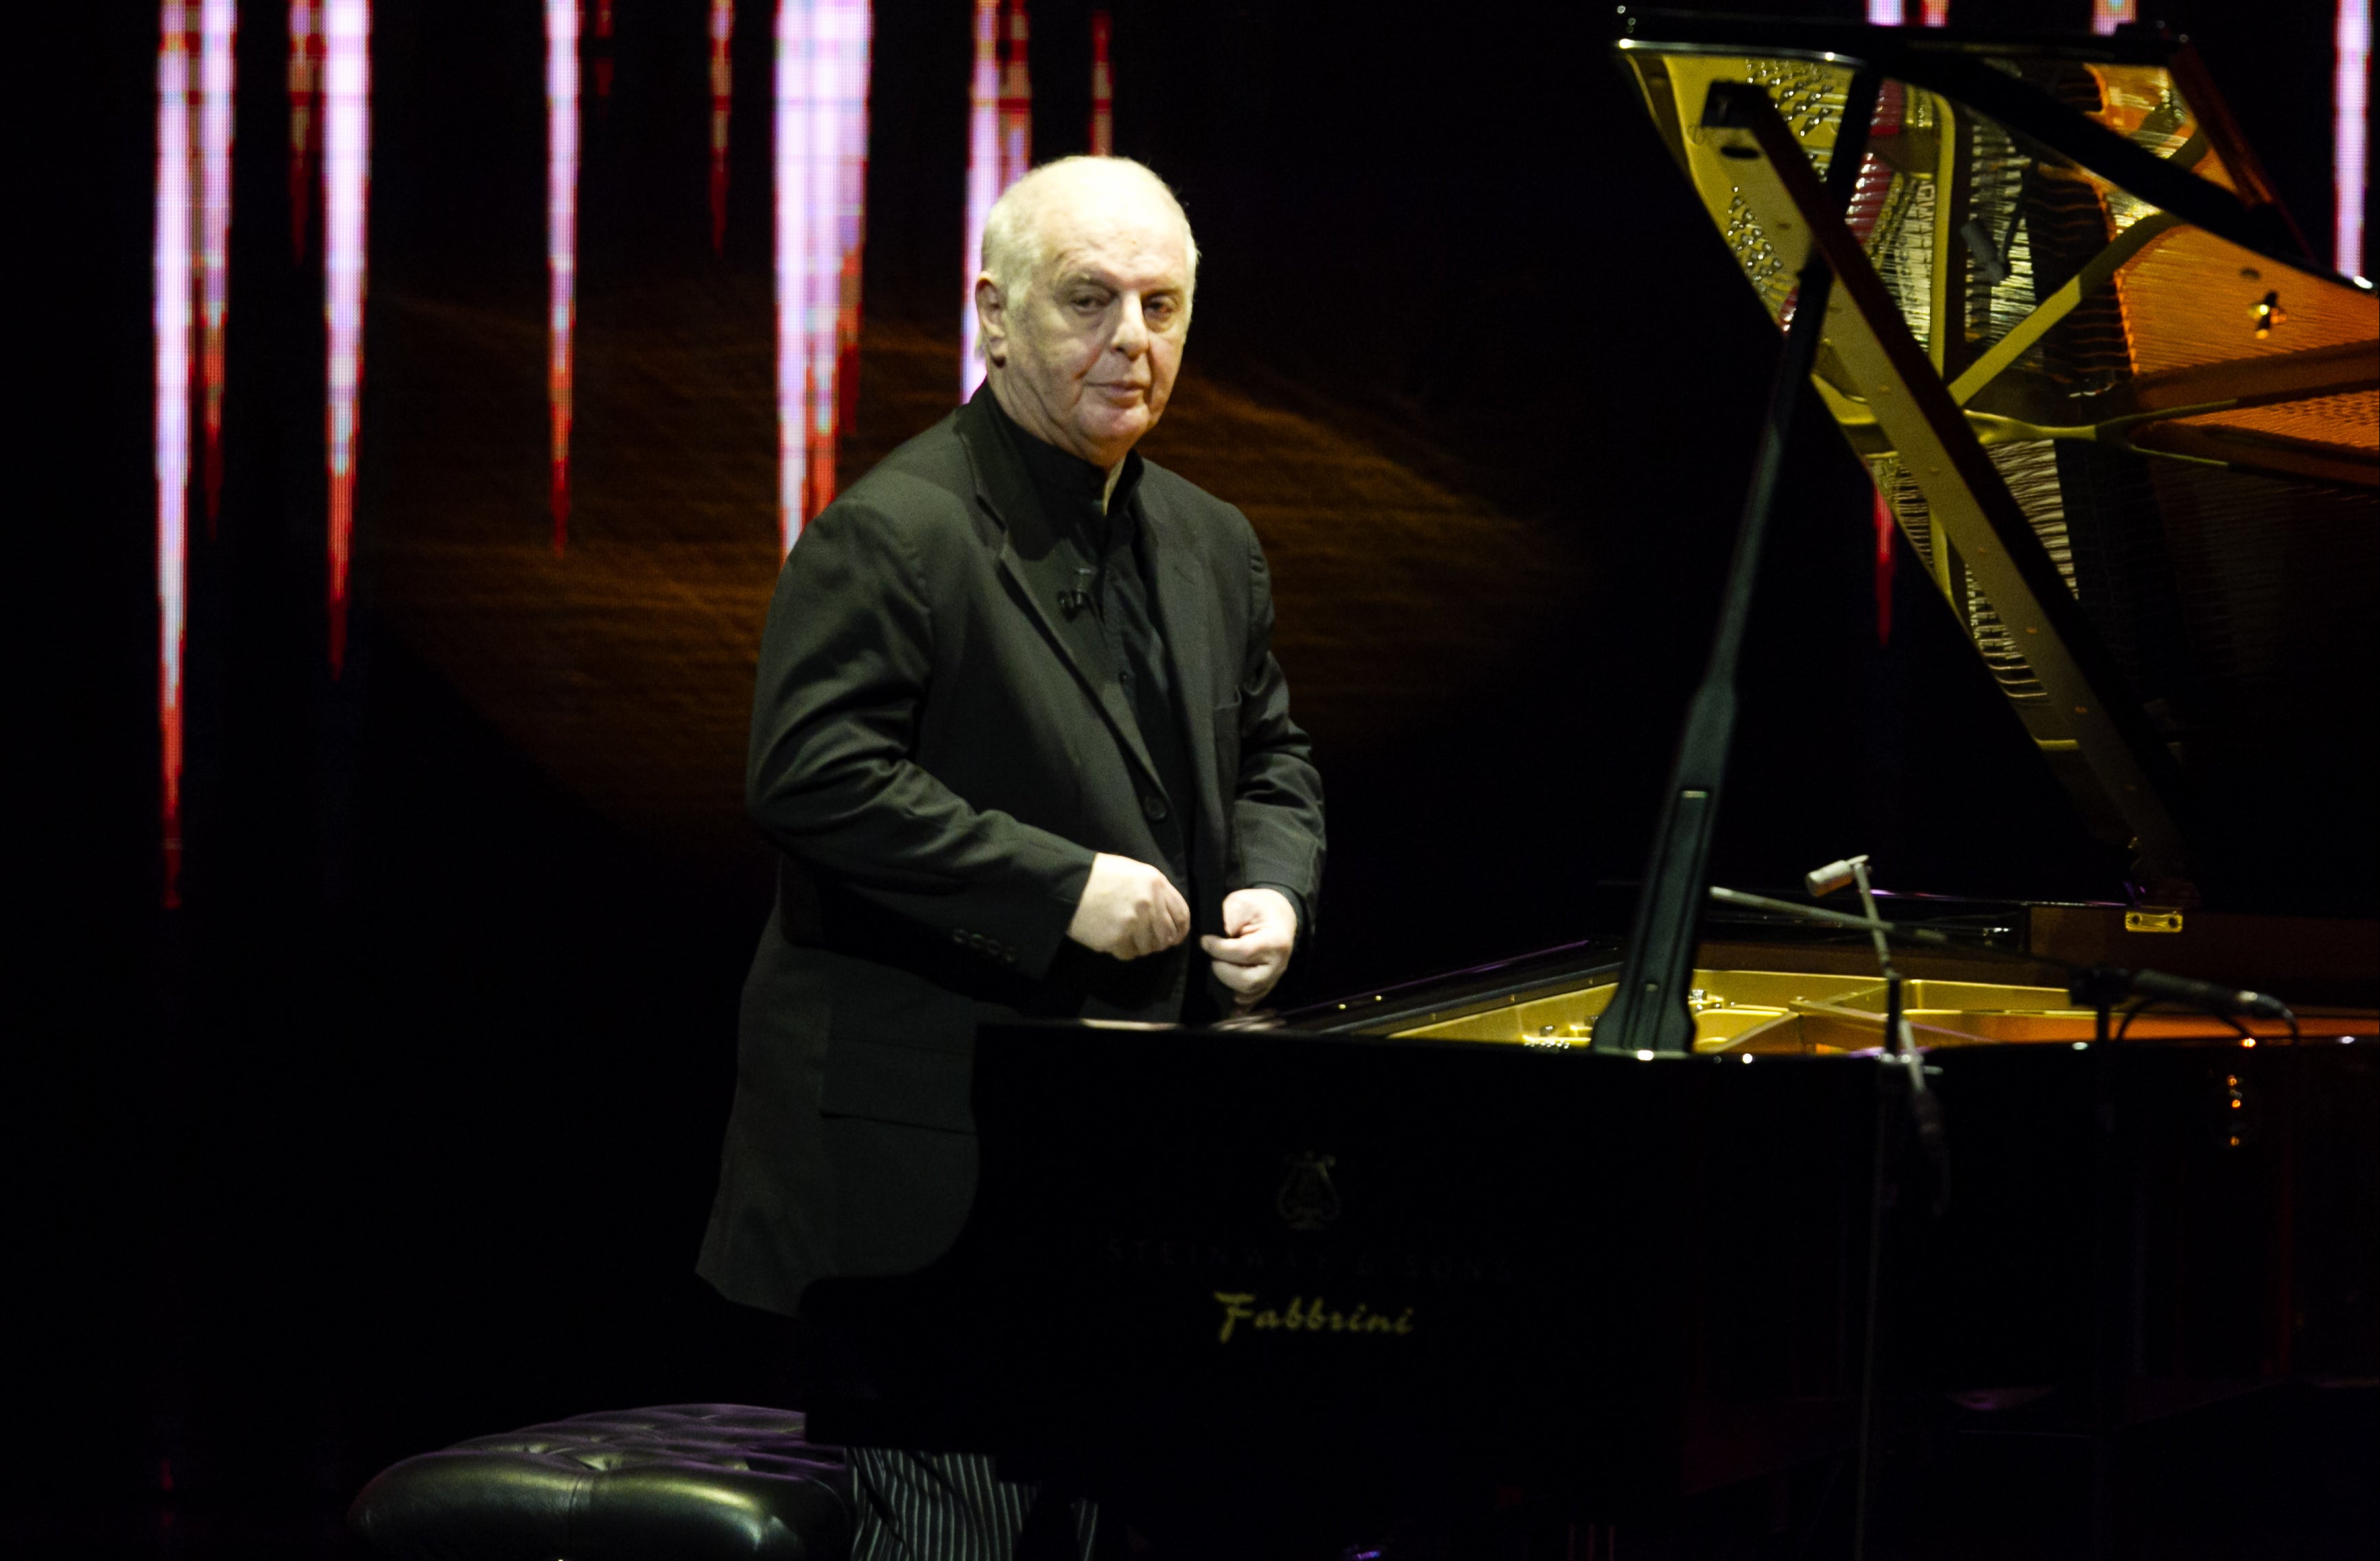 Daniel Barenboim gave his first Beethoven recital at the age of 10